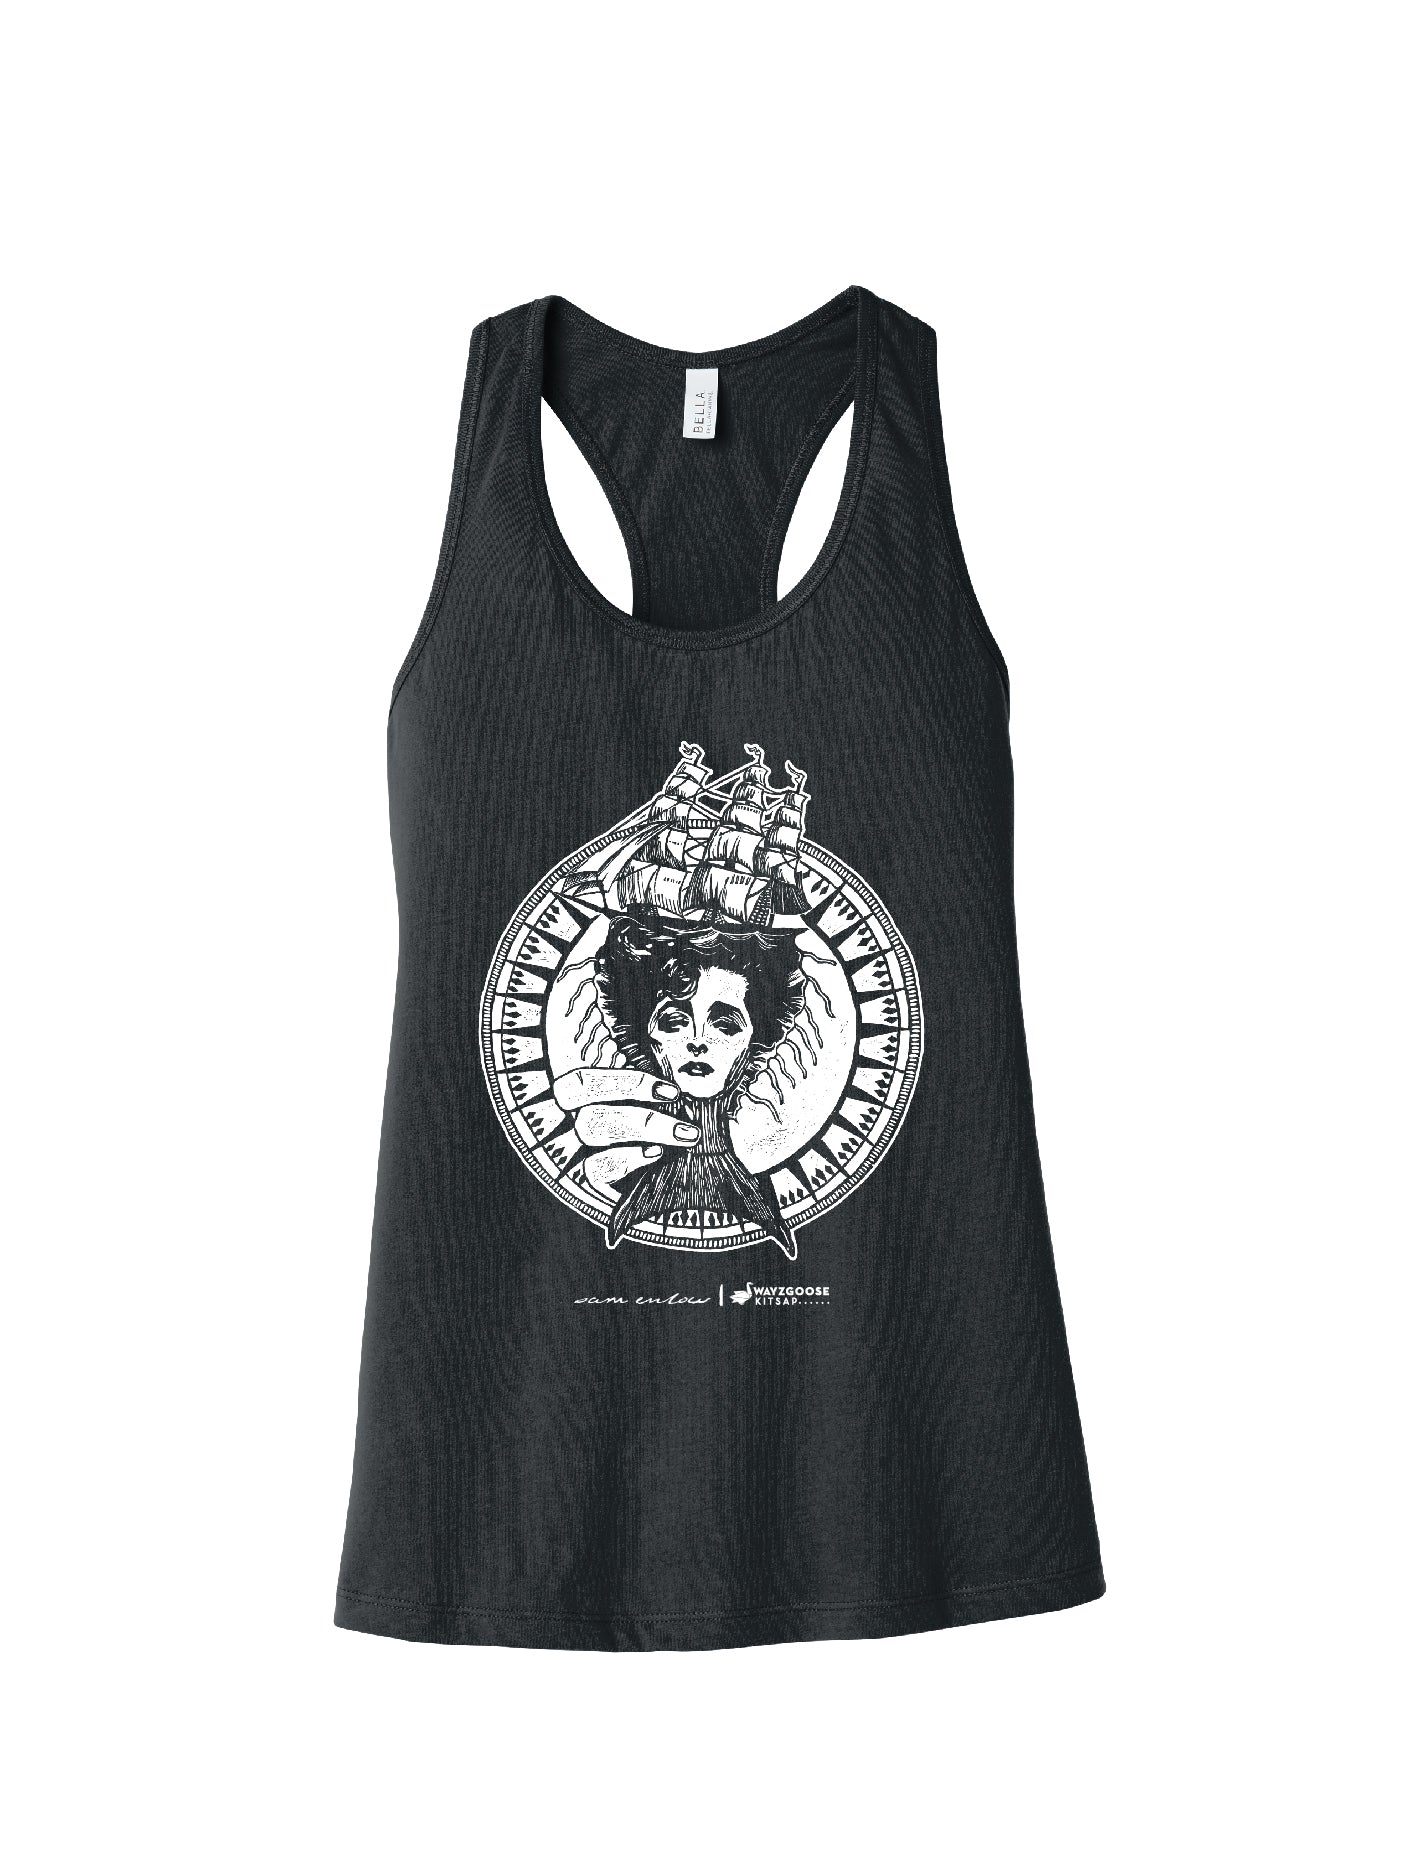 Illustration of classical nautical themes in white ink on a grey racerback tank. Art by Sam Enlow.